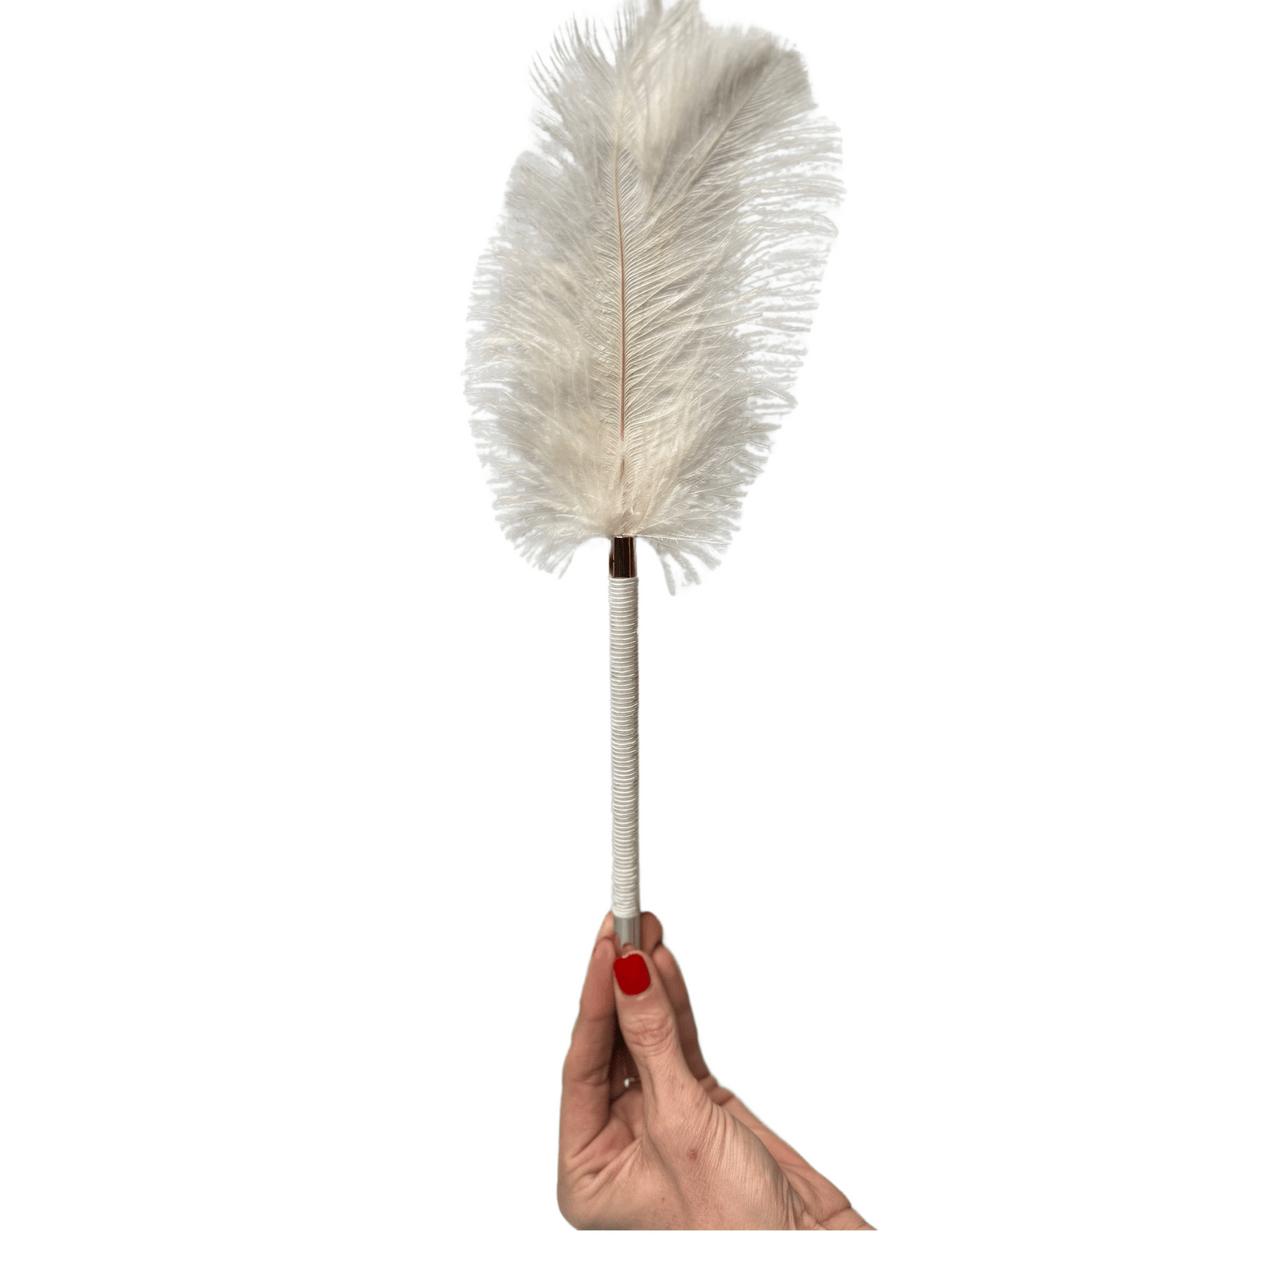 Luxurious Teasing Feather Tickler - Sensory Play Accessory with Soft Plumes & Elegant Handle